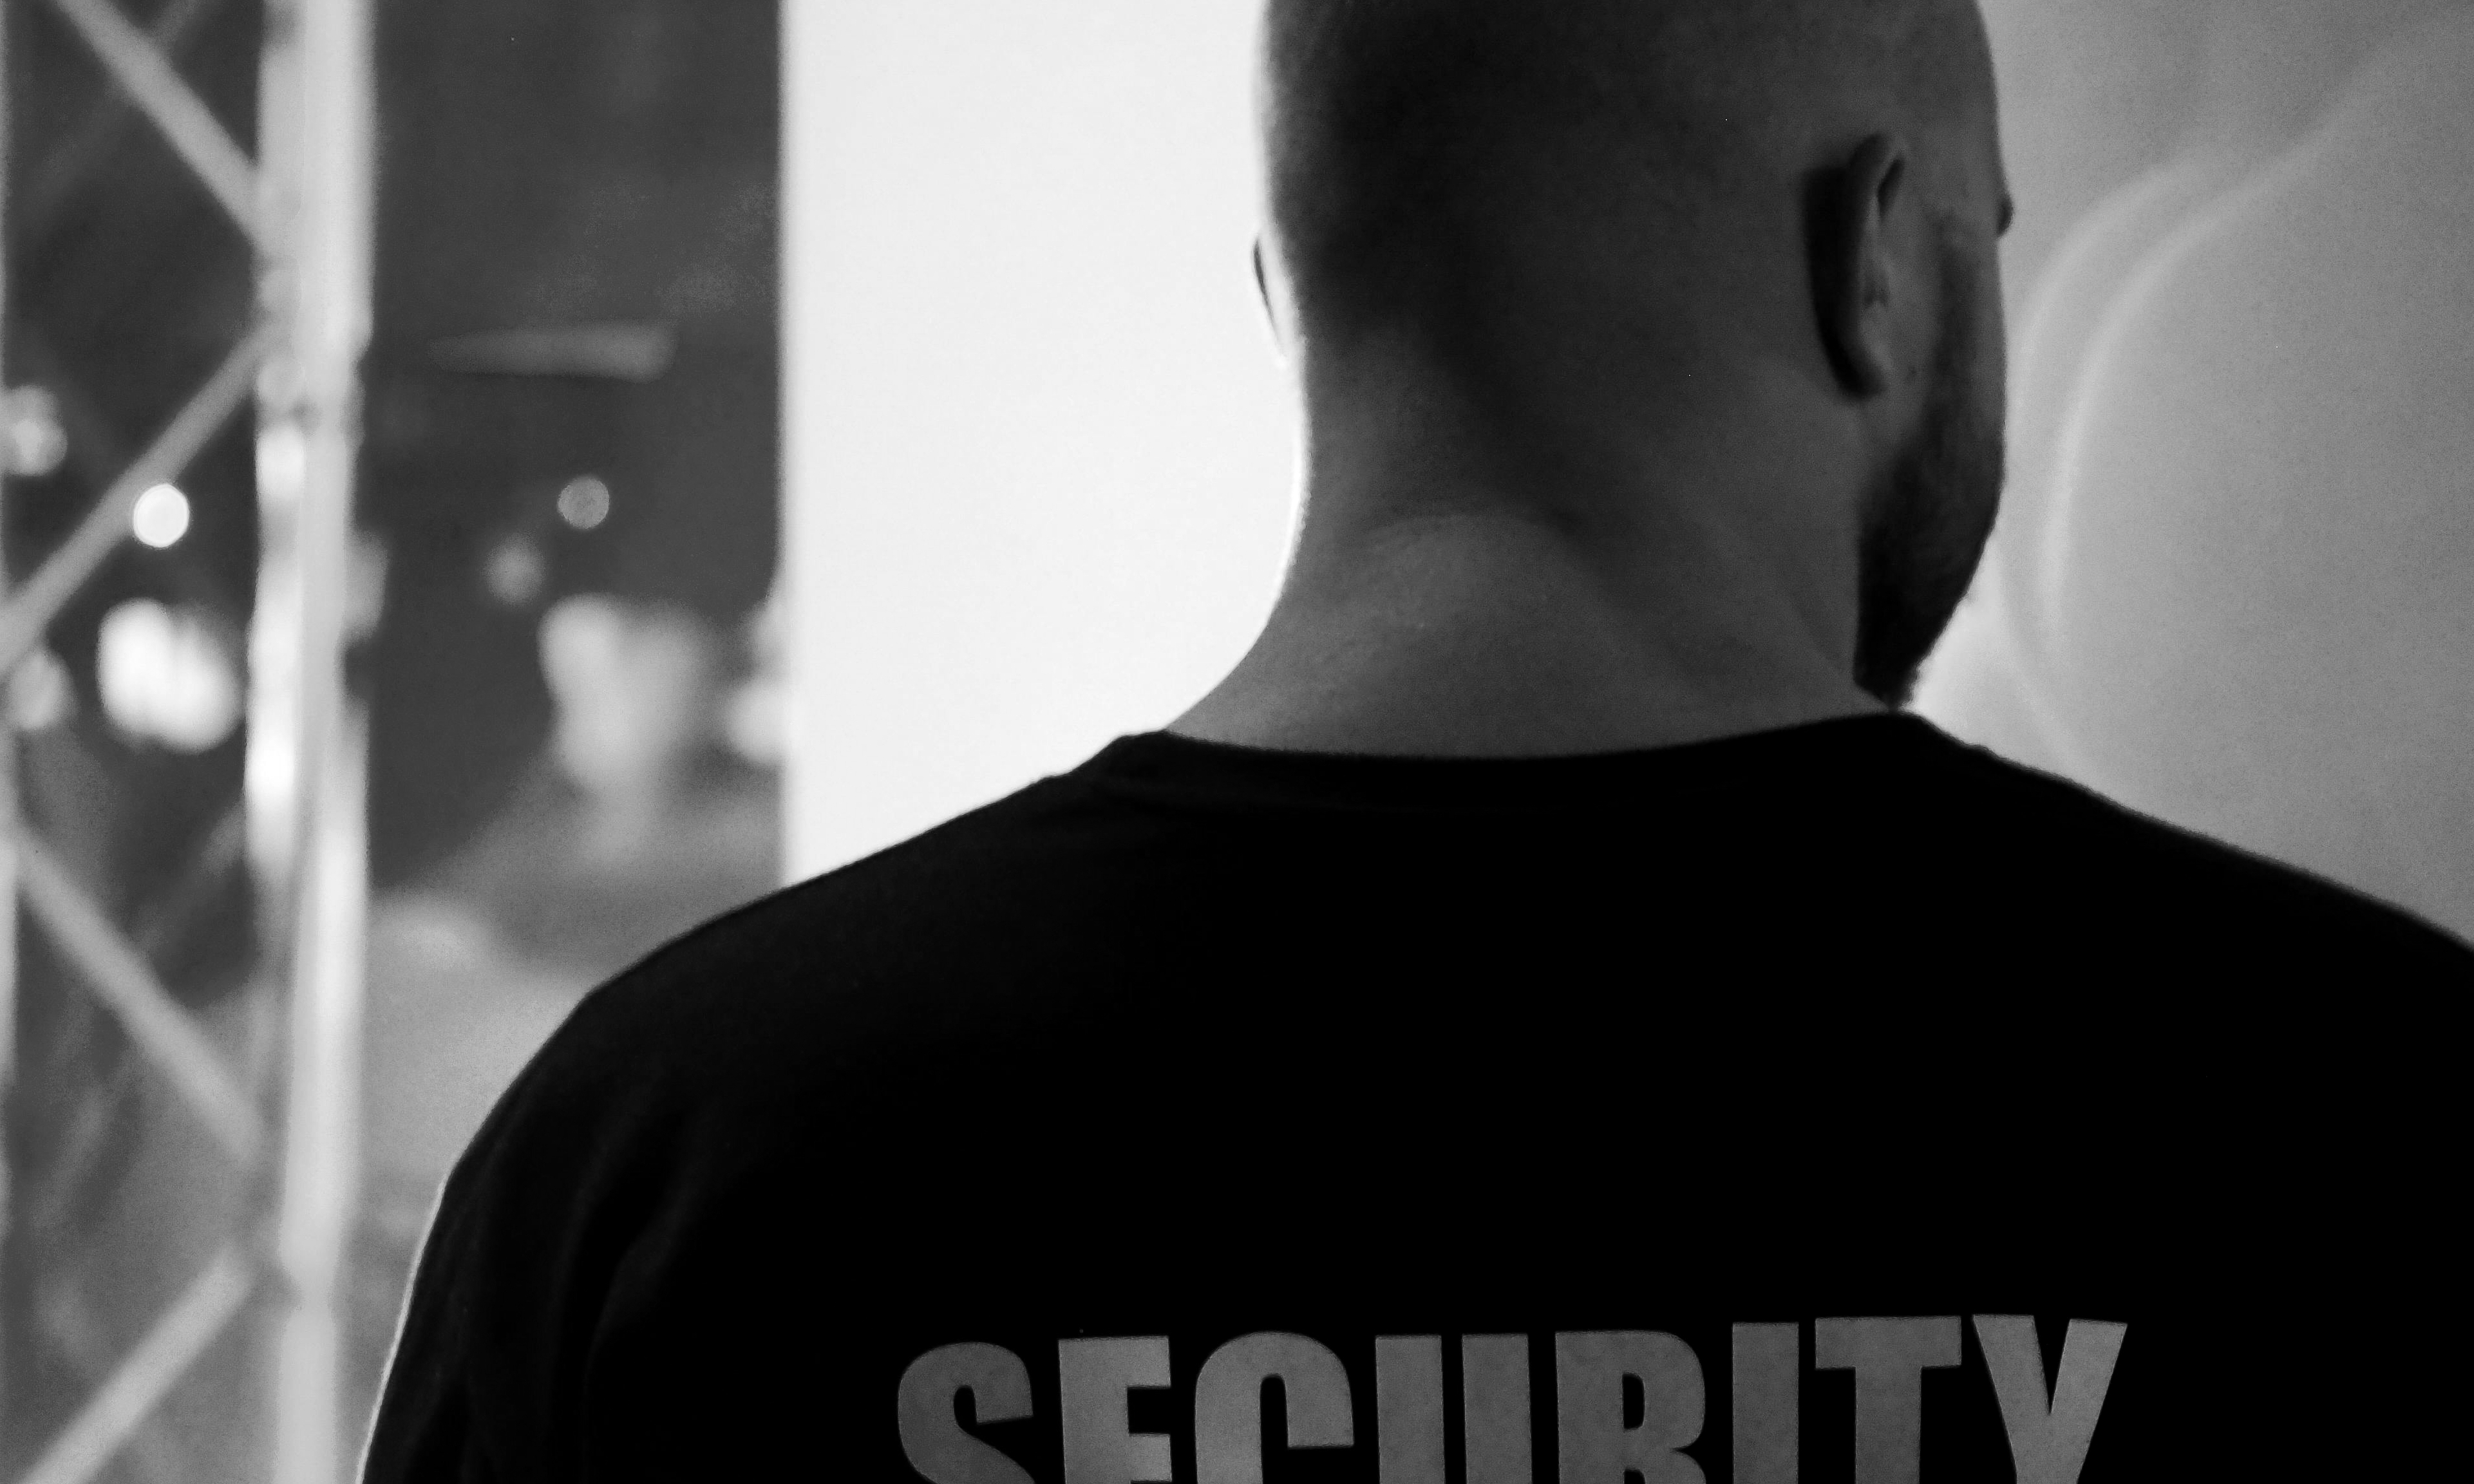 The restaurant's security guard getting involved | Source: Pexels